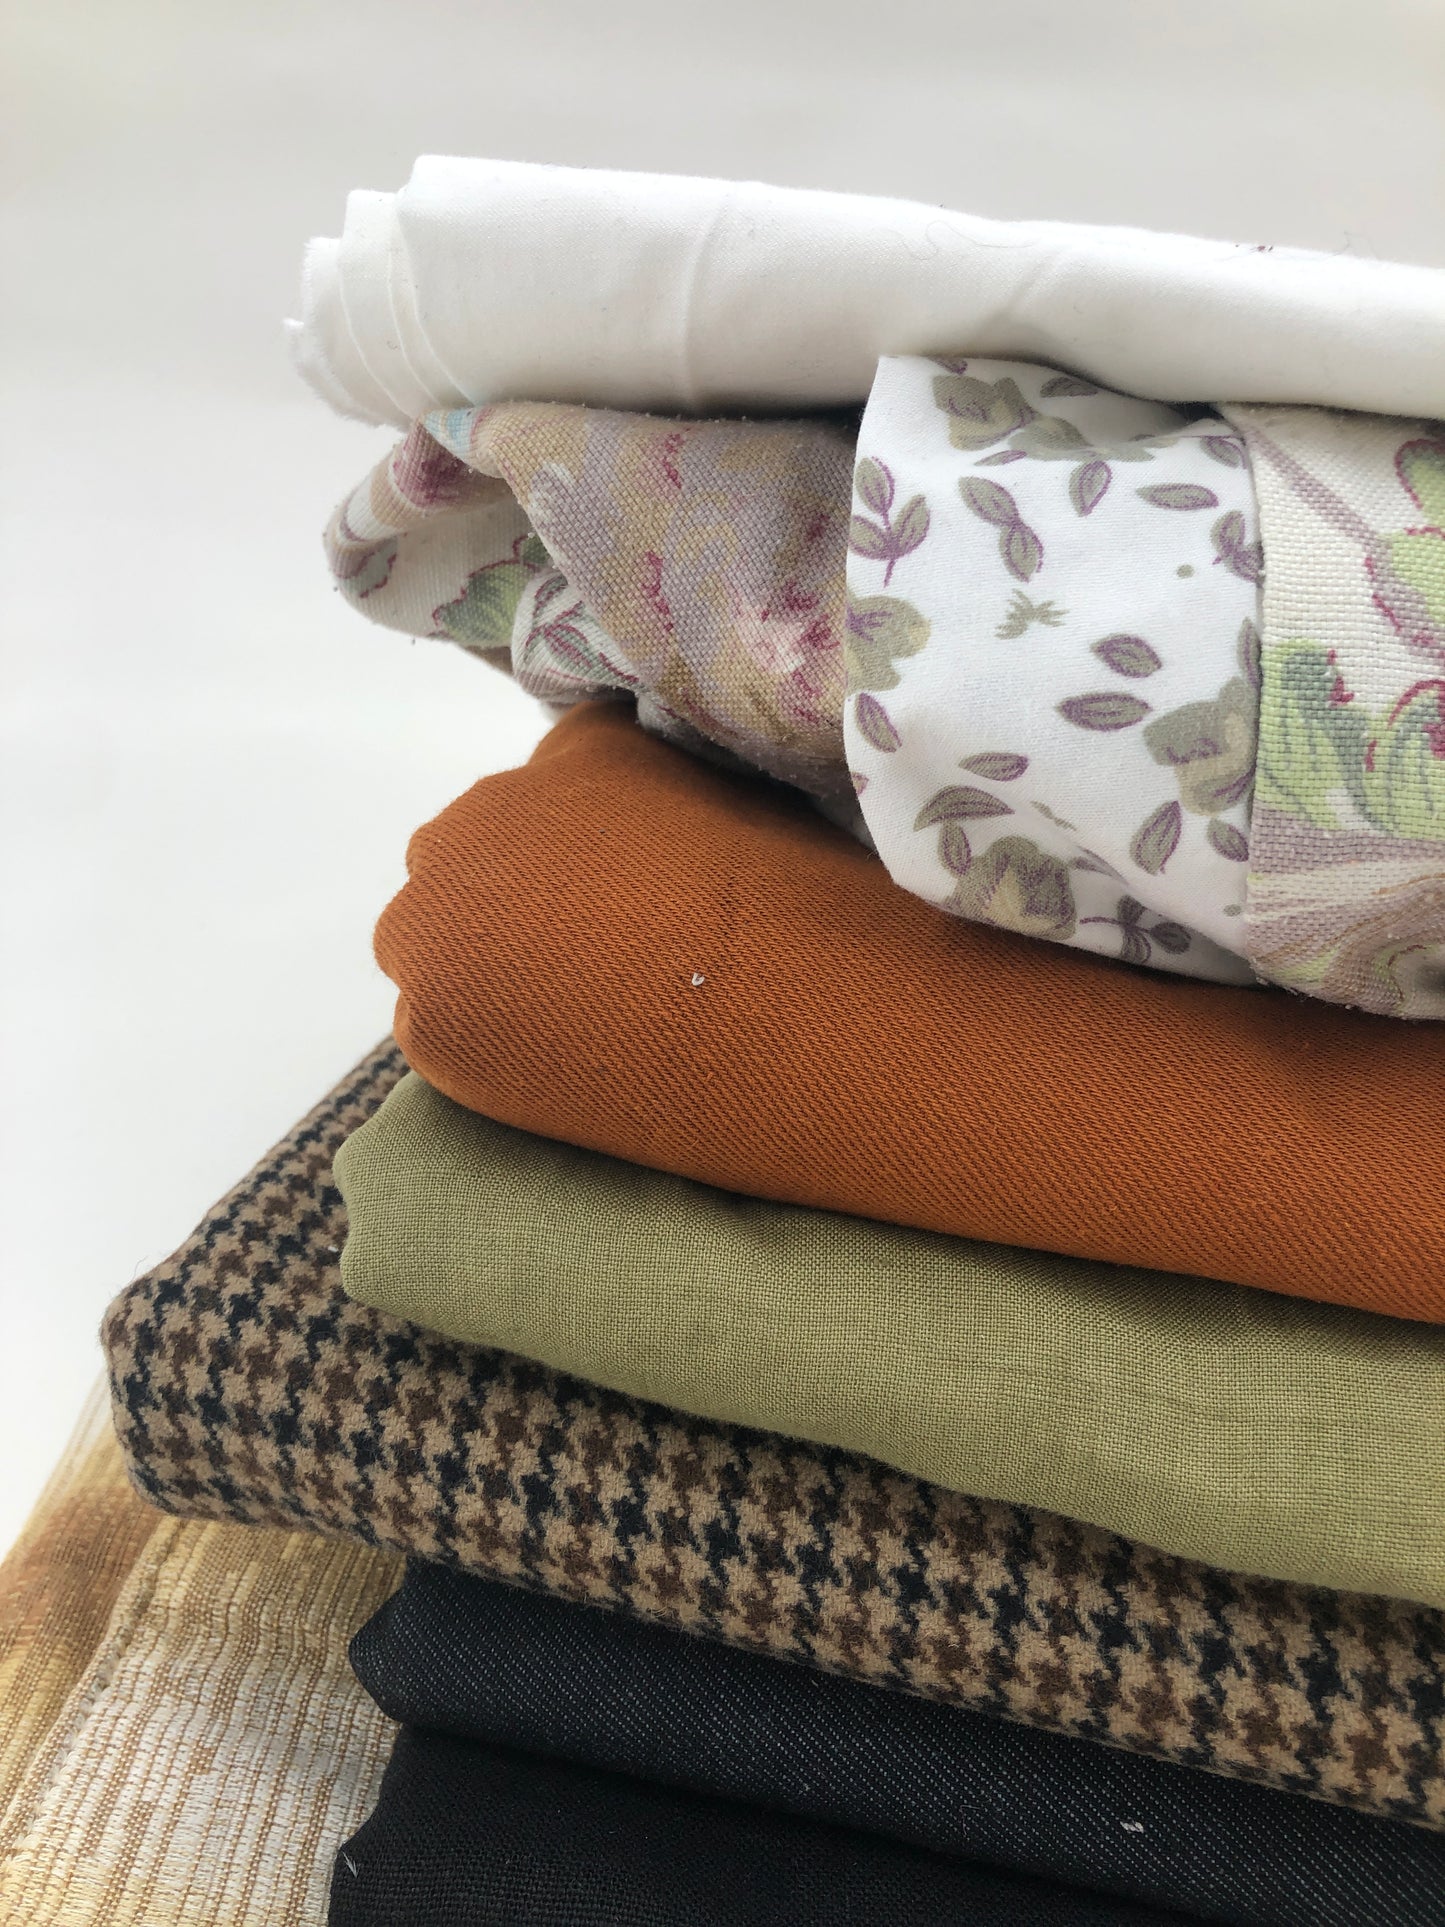 Fabric, Earthy Colours, Large Pieces